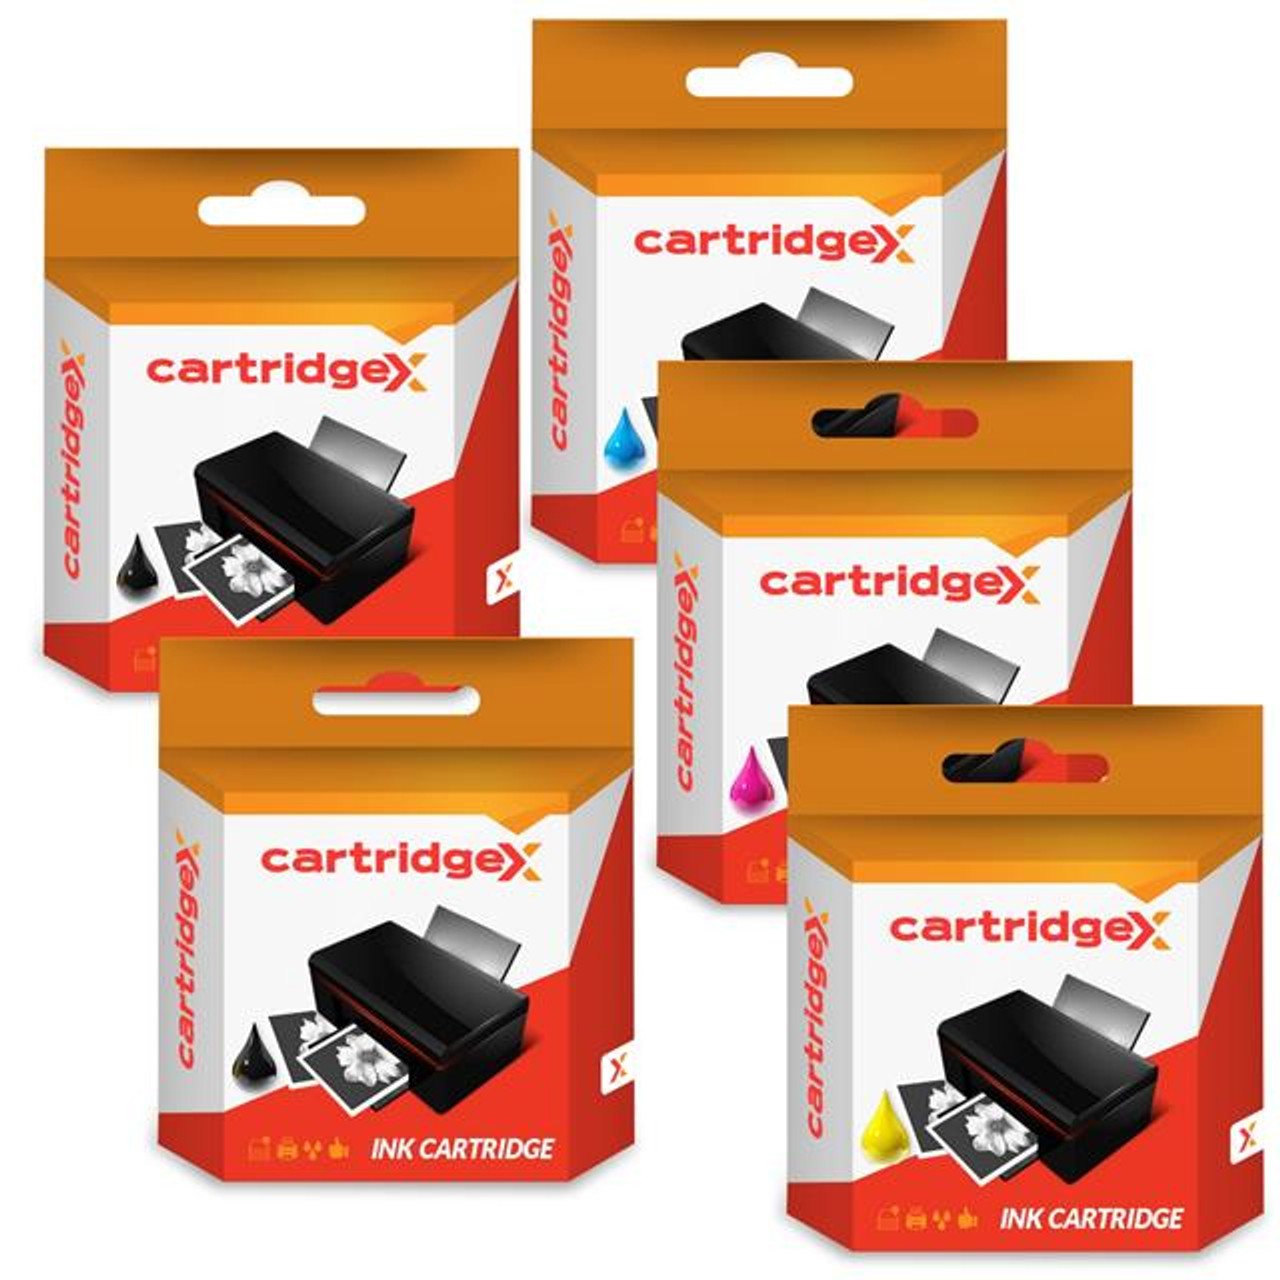 Compatible Set Of 5 Ink Cartridges For Pgi-525 & Cli-526 Canon Pixma Mg5150 Mg5250 Mg5300